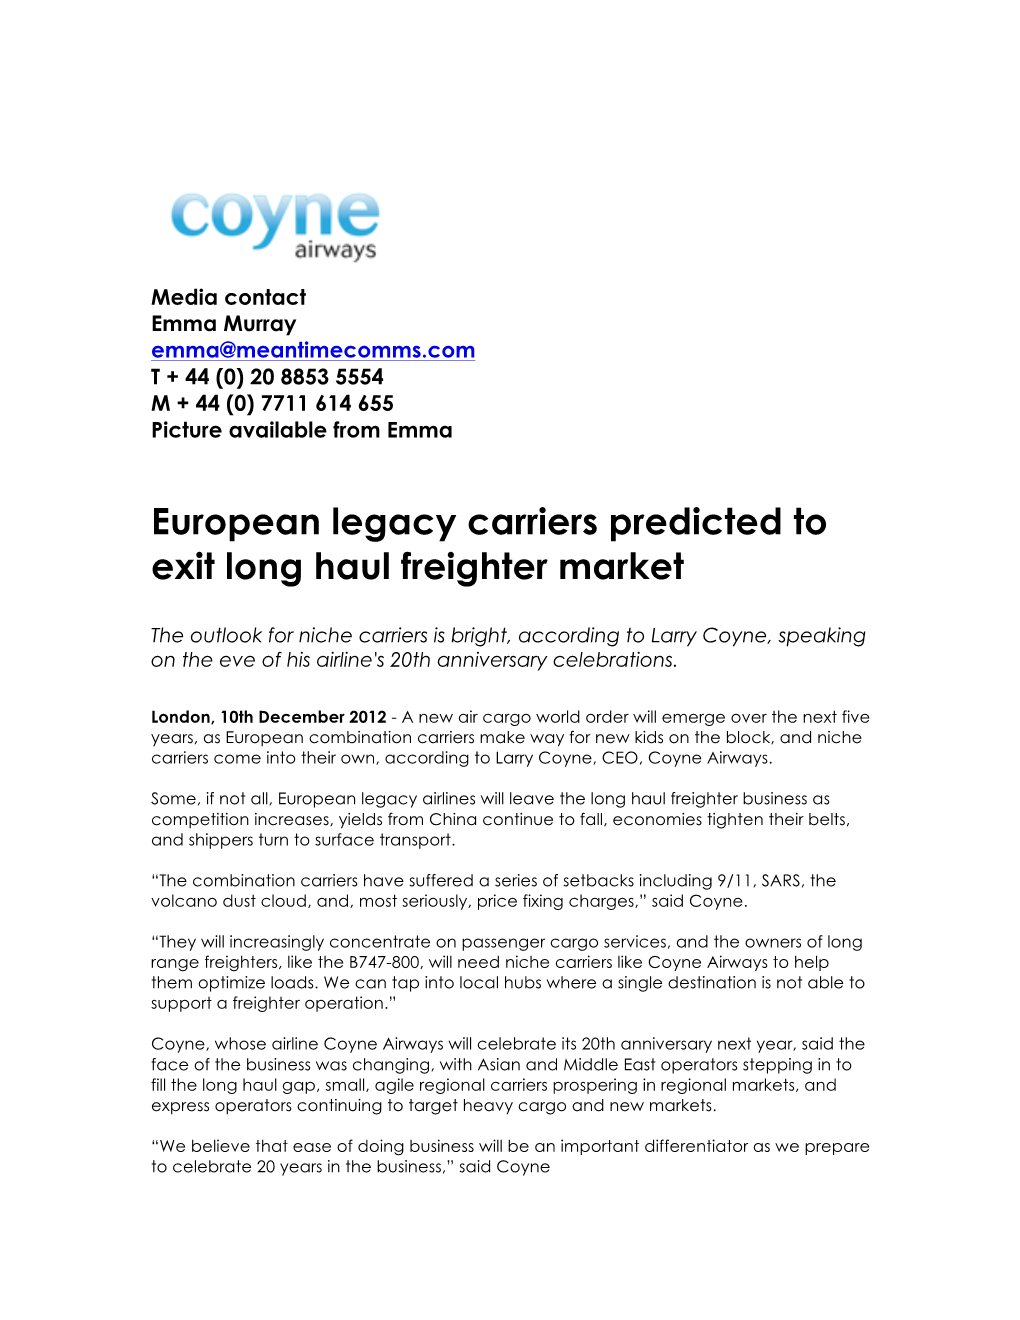 European Legacy Carriers Predicted to Exit Long Haul Freighter Market